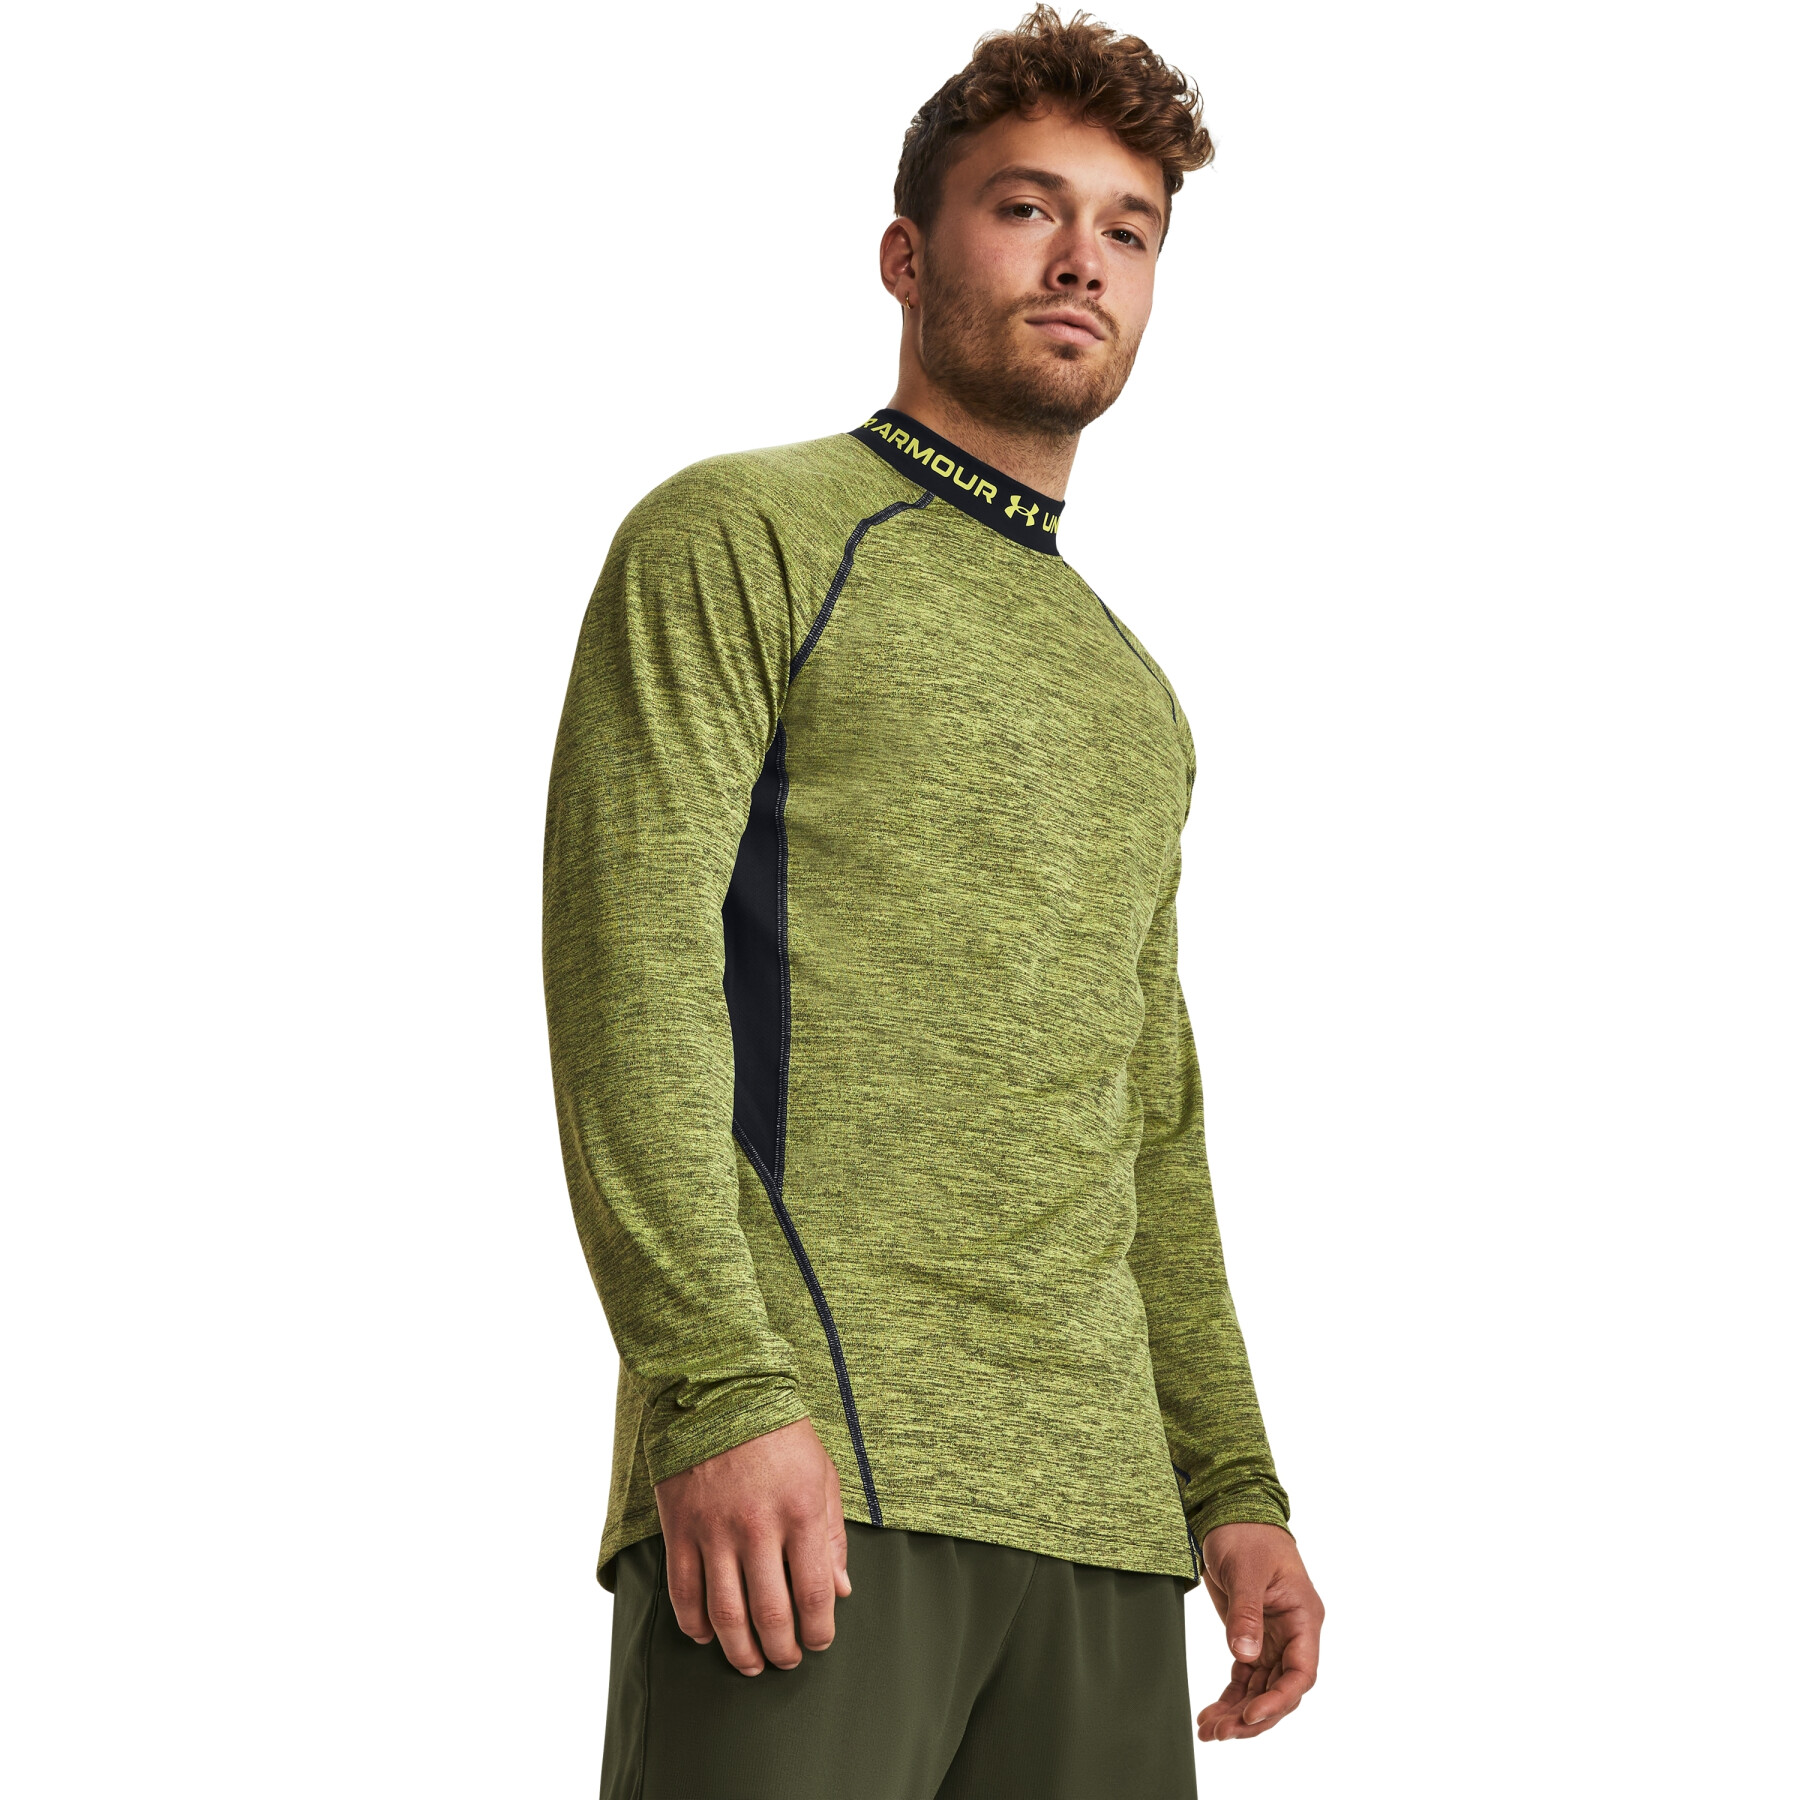 Long sleeve active top with stand-up collar Under Armour ColdGear Twist